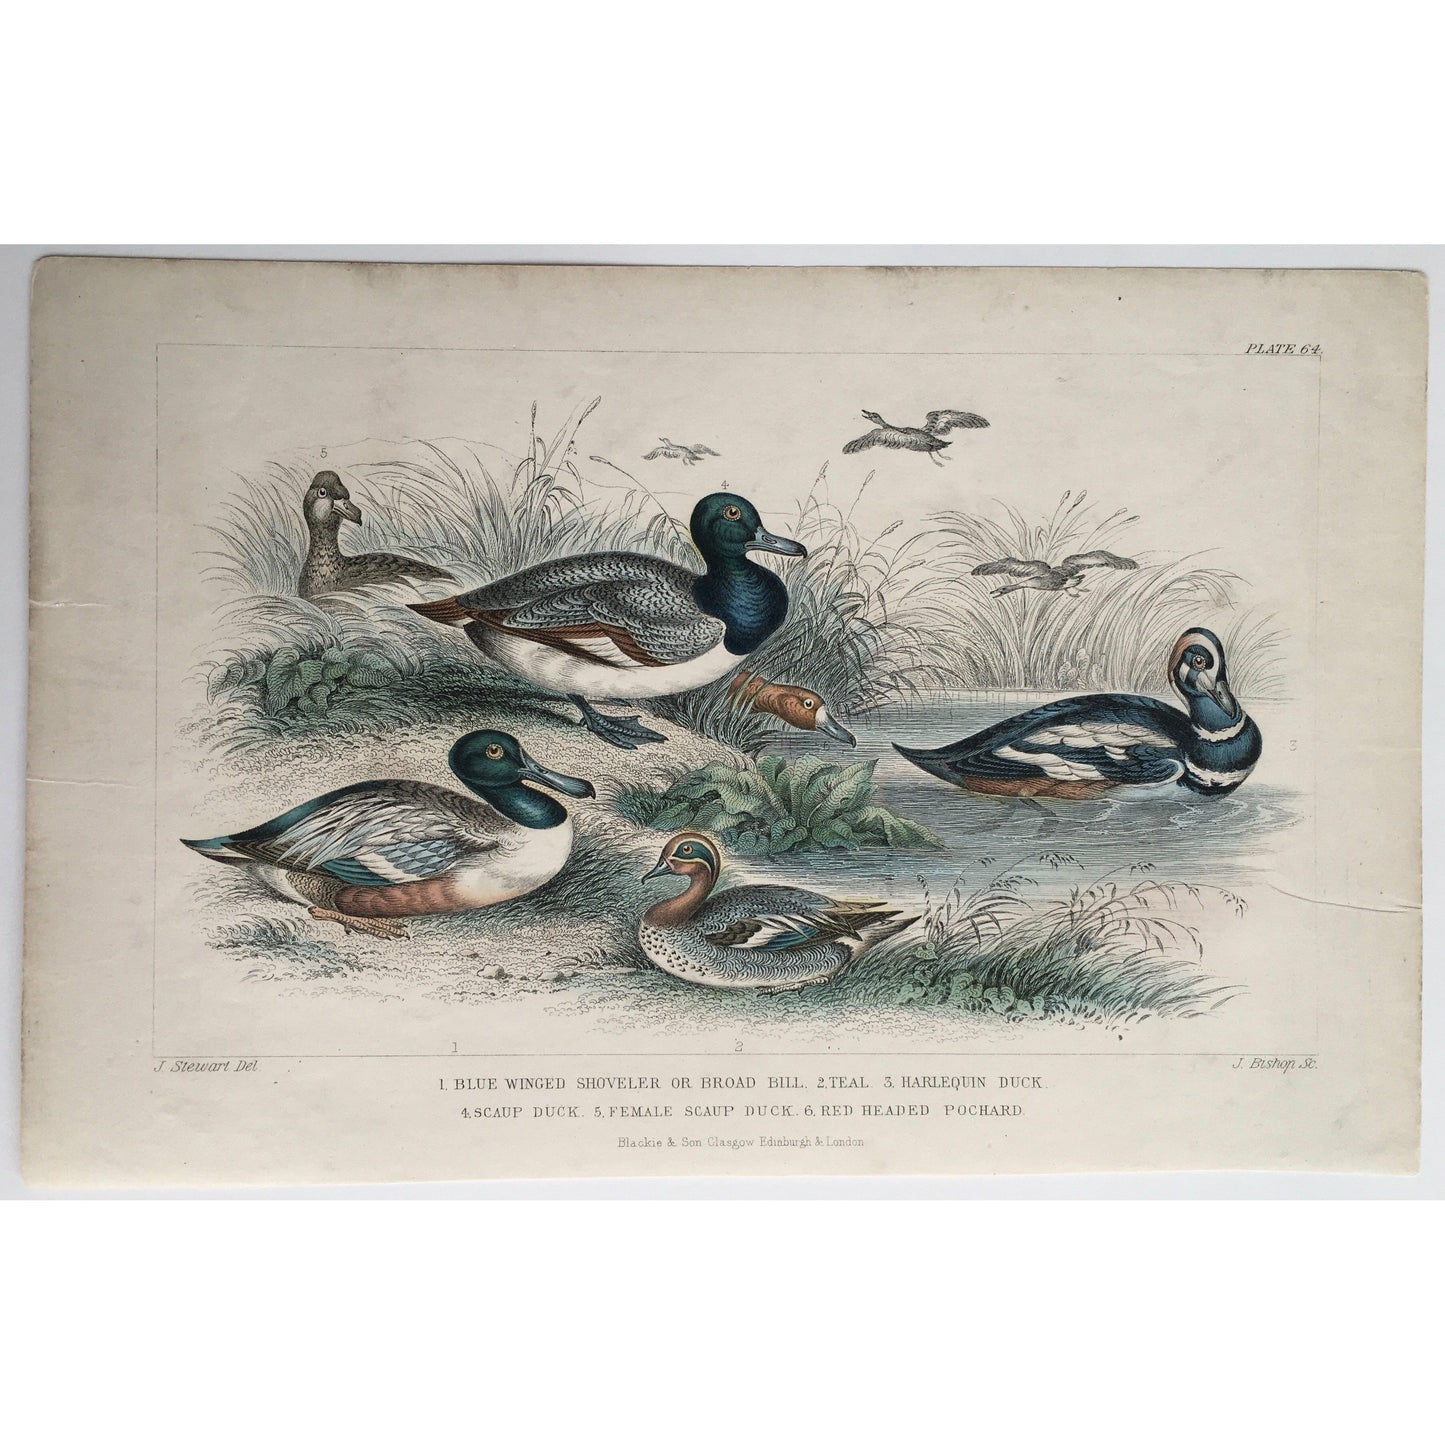 Blue Winged Shoveler, Shoveler, Broad Bill, Teal, Harlequin Duck, Duck, Ducks, Scaup Duck, Female Scaup Duck, Red Headed Pochard, Pochard, Bird, Birds, Ornithology, Oliver Goldsmith, Goldsmith, Natural History, Animals, Wildlife, A History of the Earth and Animated Nature, Nature, Blackie & Son, Blackie and Son, 1852, Coloured Colorful, J. Stewart, J. Bishop, Stewart, Bishop, Antique Prints, Vintage, Original, Art, Wall decor, Old Prints, Old Books, Rare Books,